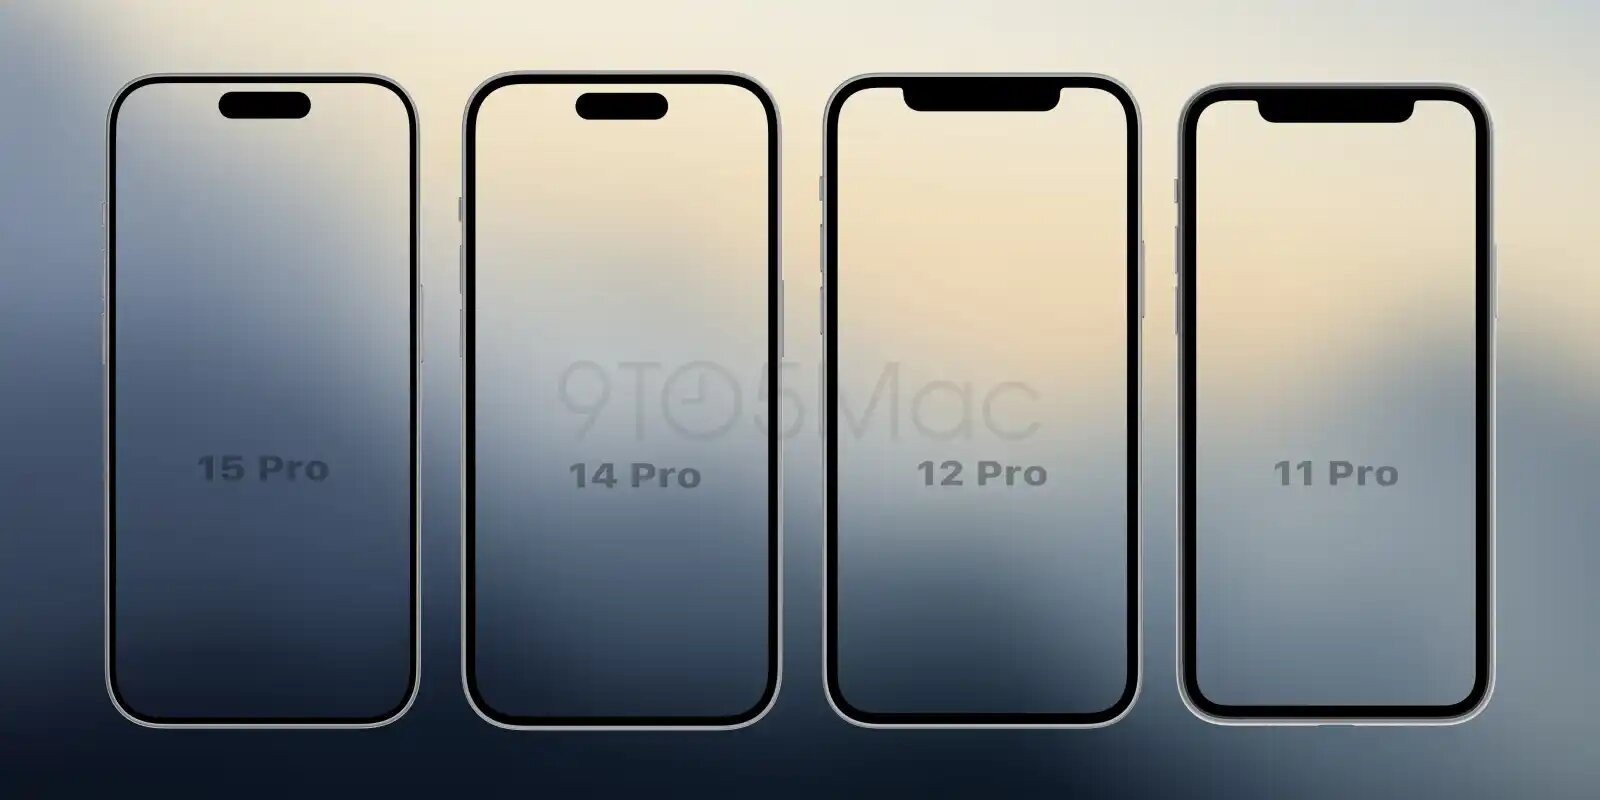 Iphone 15 Pro Max габариты. Рамка iphone 15 Pro Max. Iphone 15 Pro Max диагональ экрана. Iphone 15 vs 15 Pro.